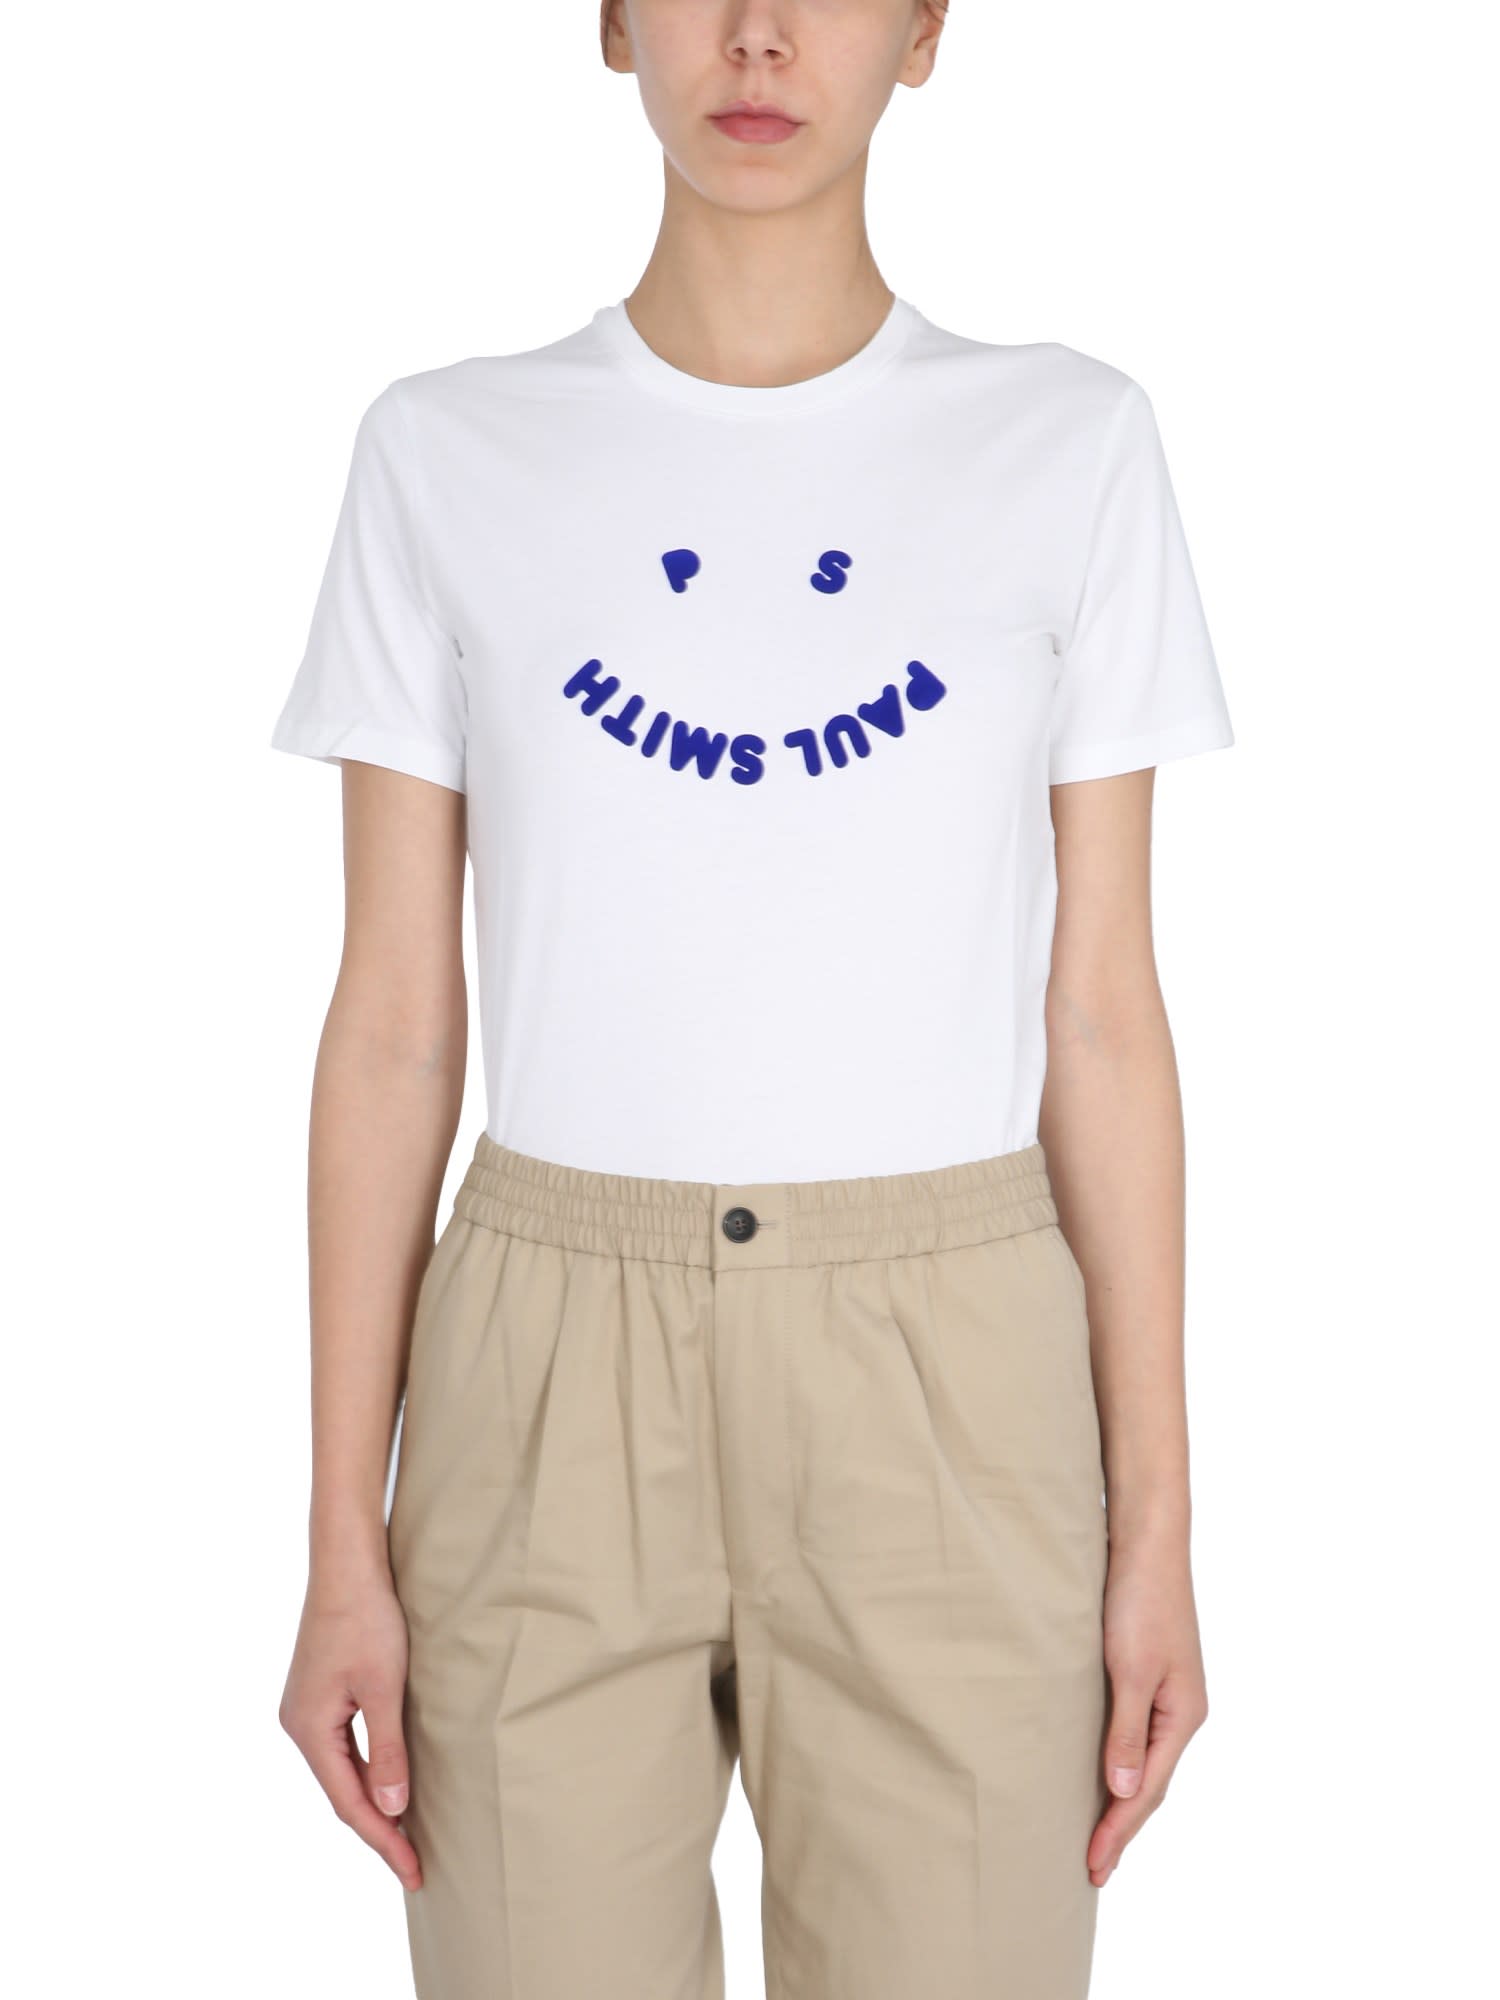 Paul Smith Face Printed T-shirt